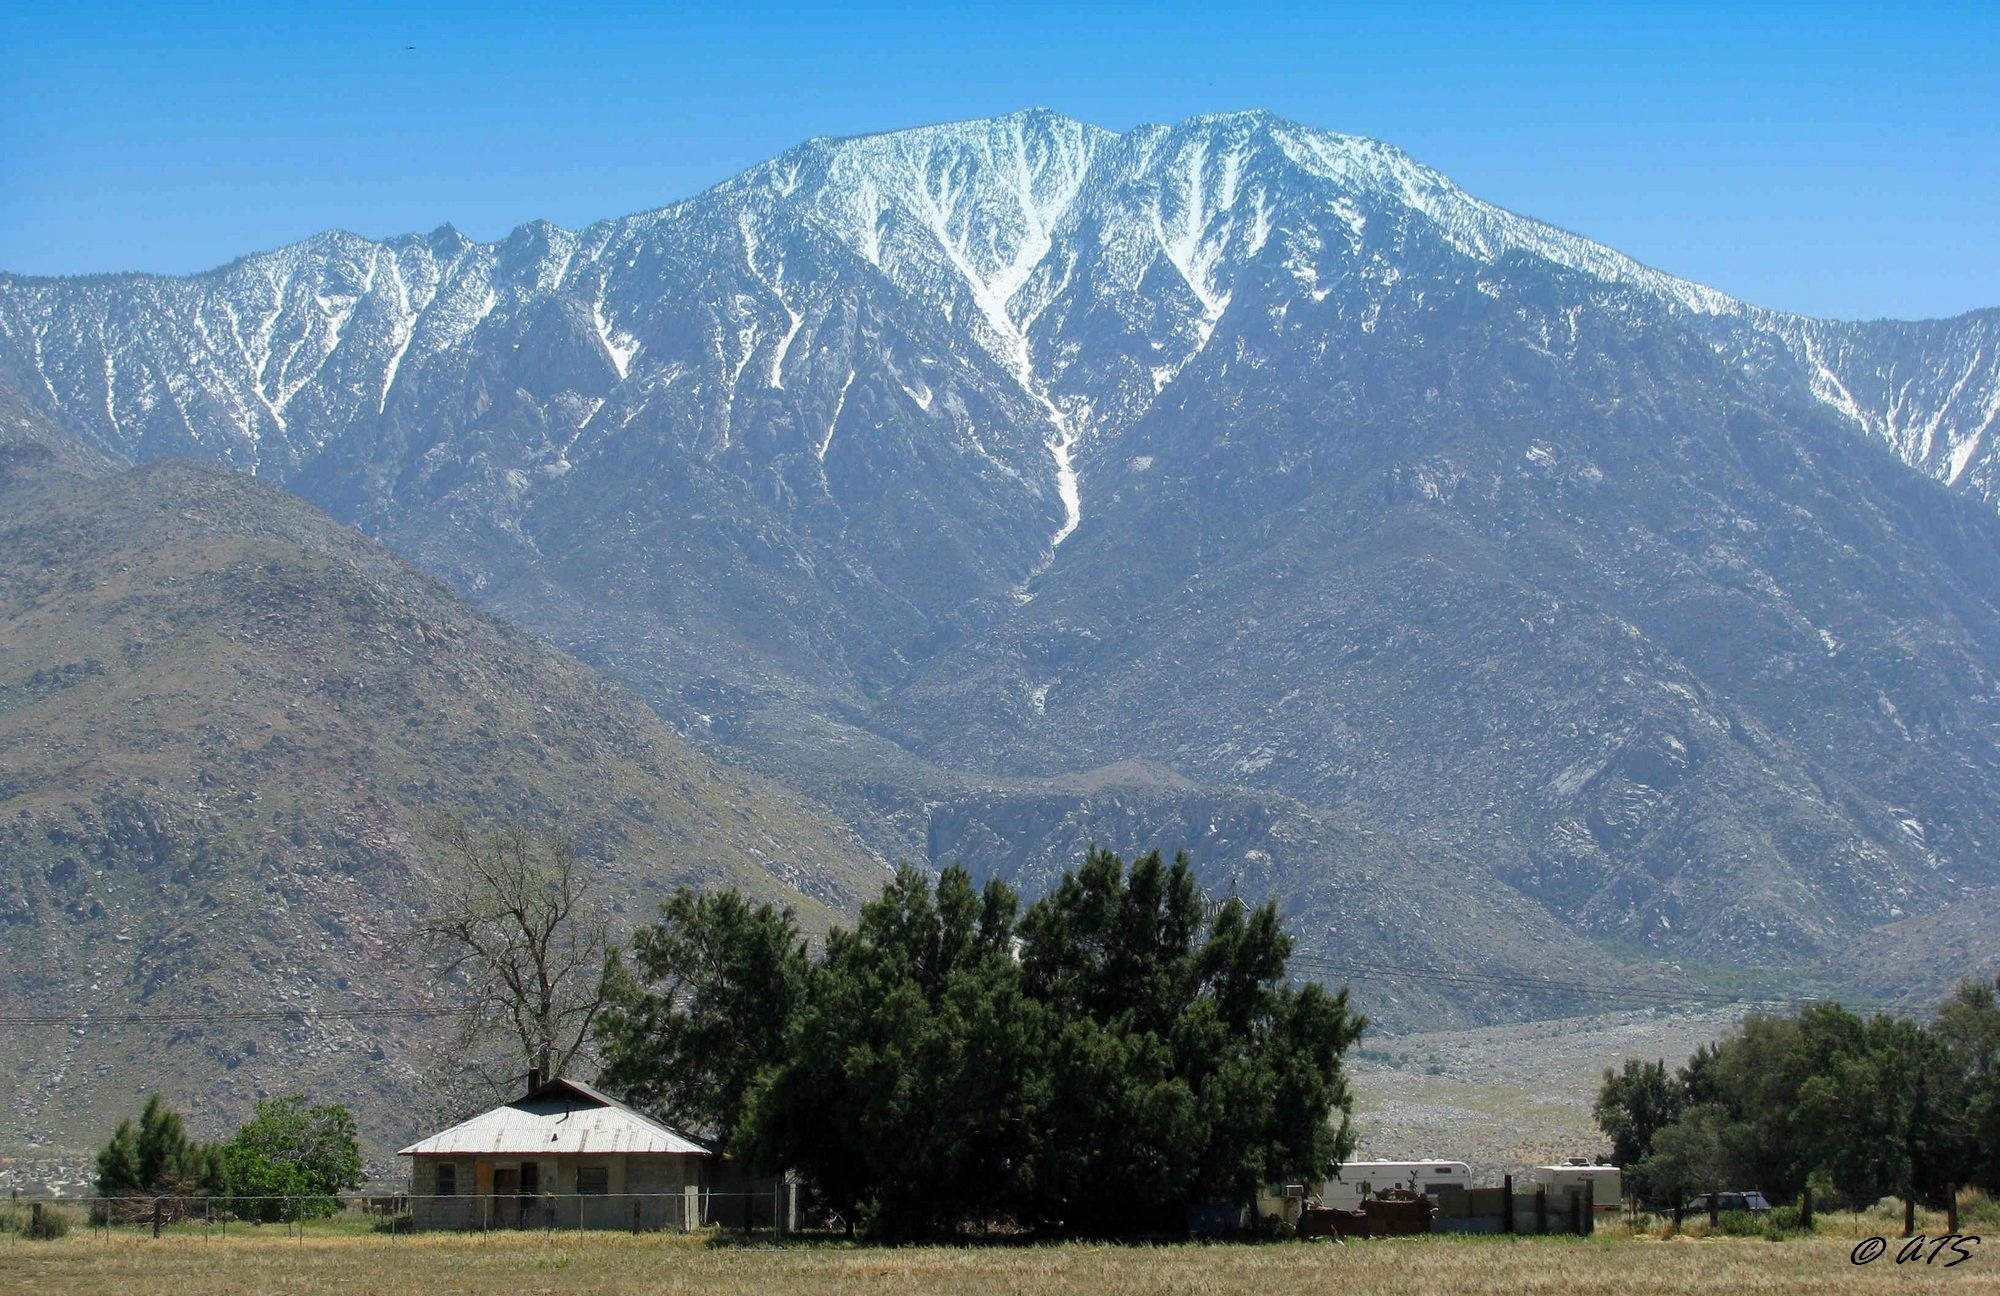 Mt. San Jacinto from the I10 rest stop